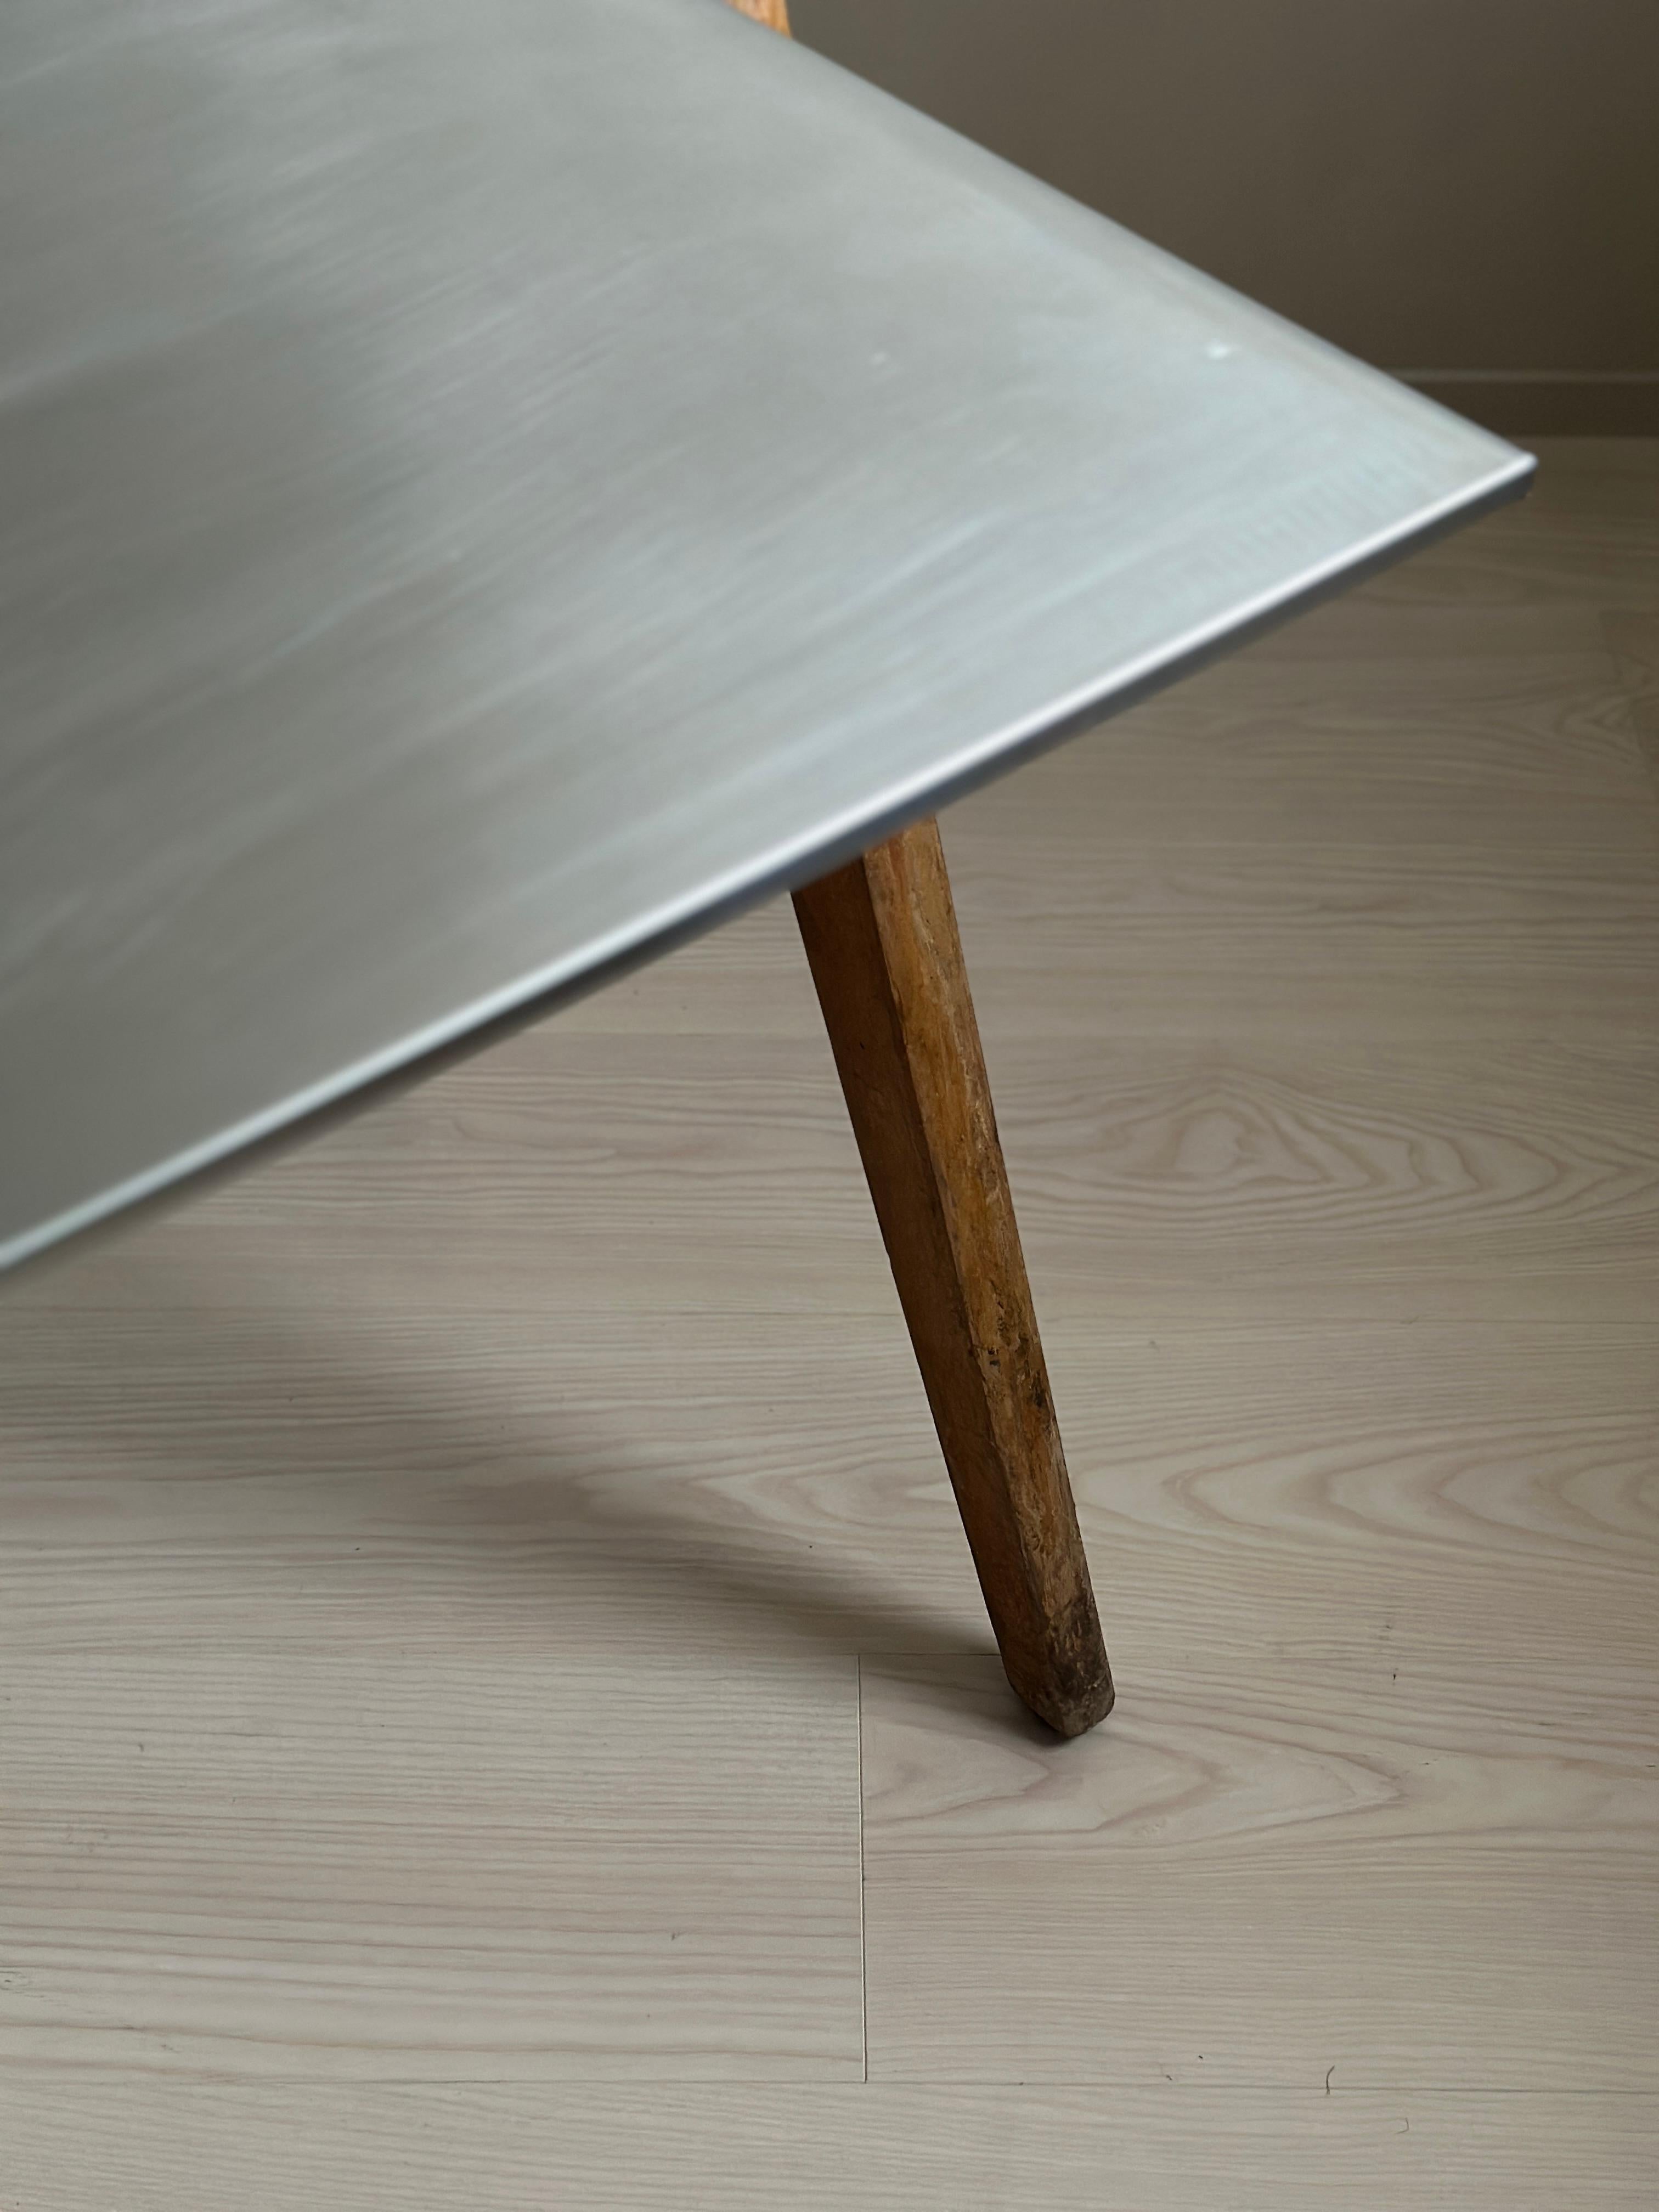 British Mid-Century Desk by Robin Day with Zinc Top and Beech Legs, 1950s For Sale